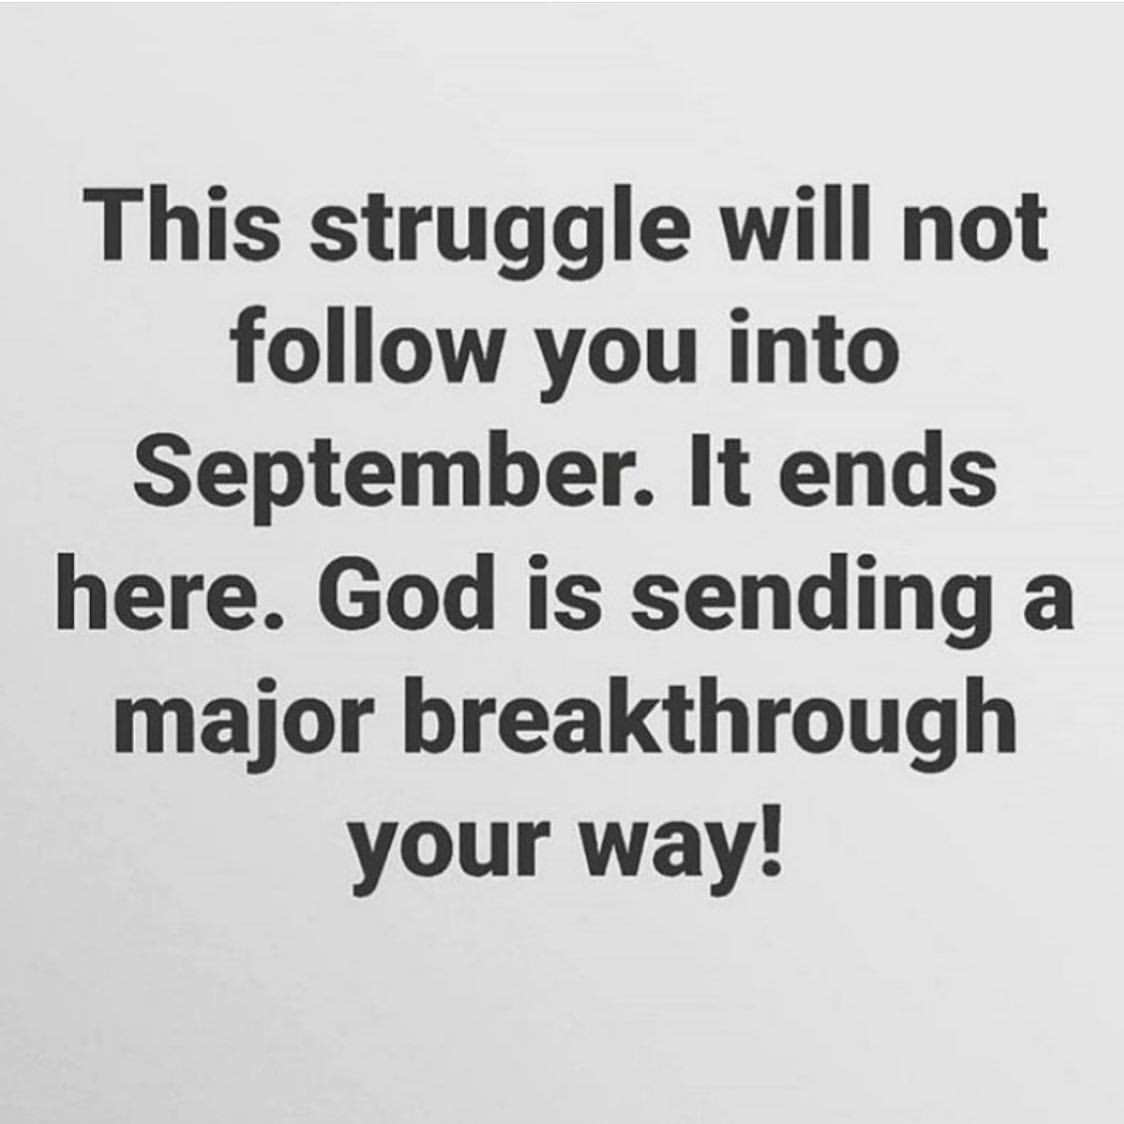 This struggle will not follow you into September. It ends here. God is sending a major breakthrough your way!